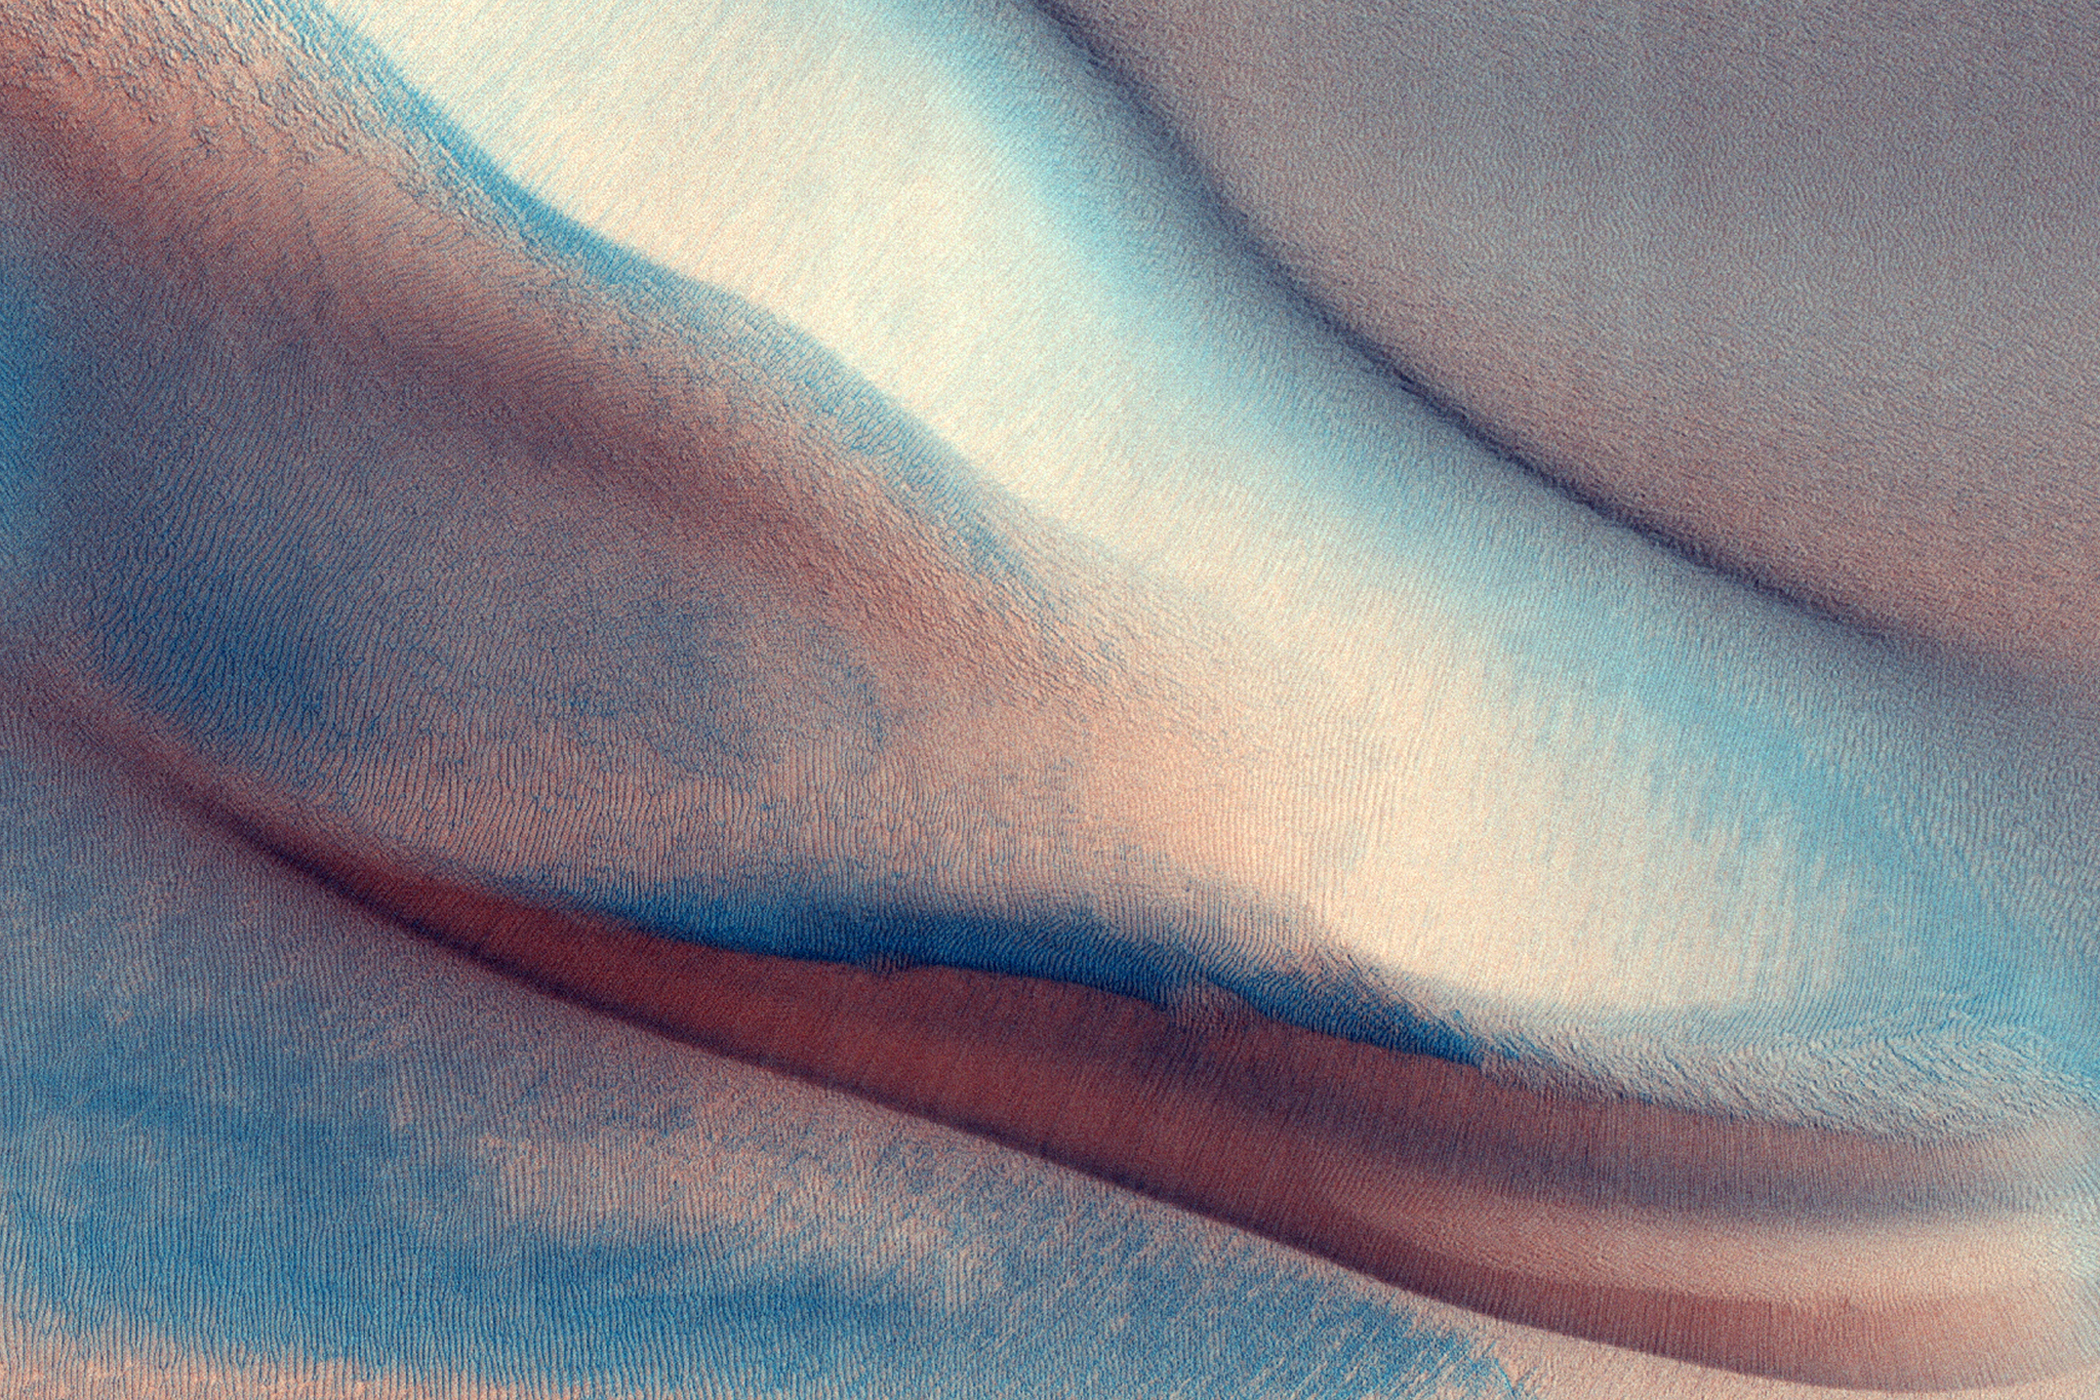 Sand dunes are among the most widespread aeolian features present on Mars. Their spatial distribution and morphology, sensitive to subtle shifts in wind circulation patterns and wind strengths, can relate to patterns of erosion and deposition, and give clues to the sedimentary history of the surrounding terrain.